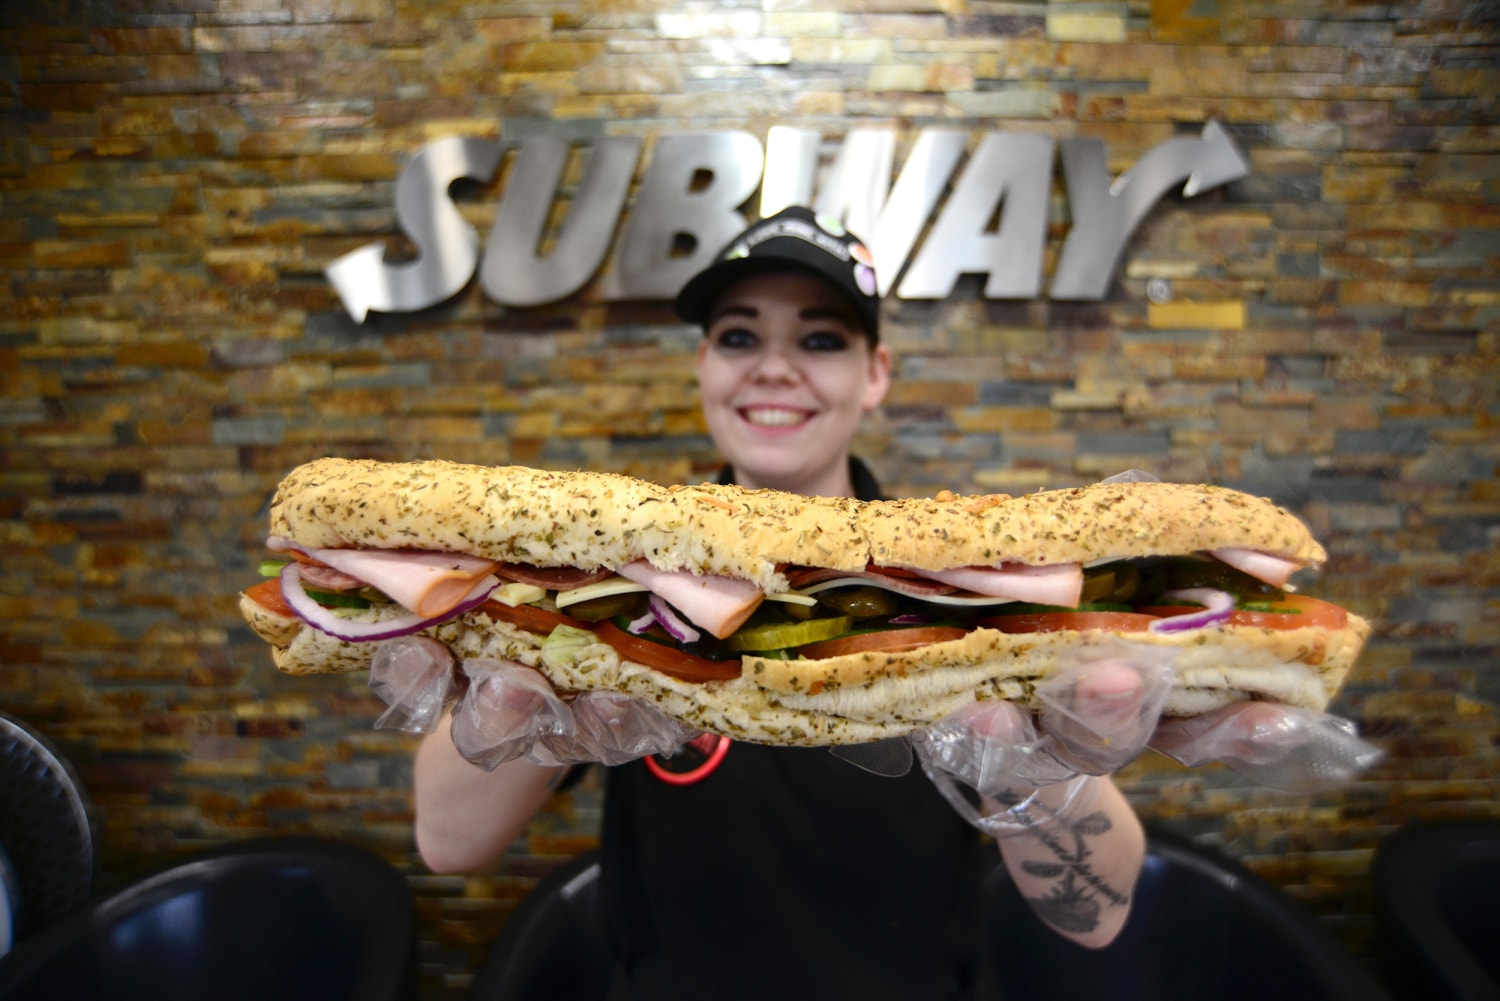 Subway fanatic gets free sandwiches forever after getting a footlong tattoo   Fox News Video